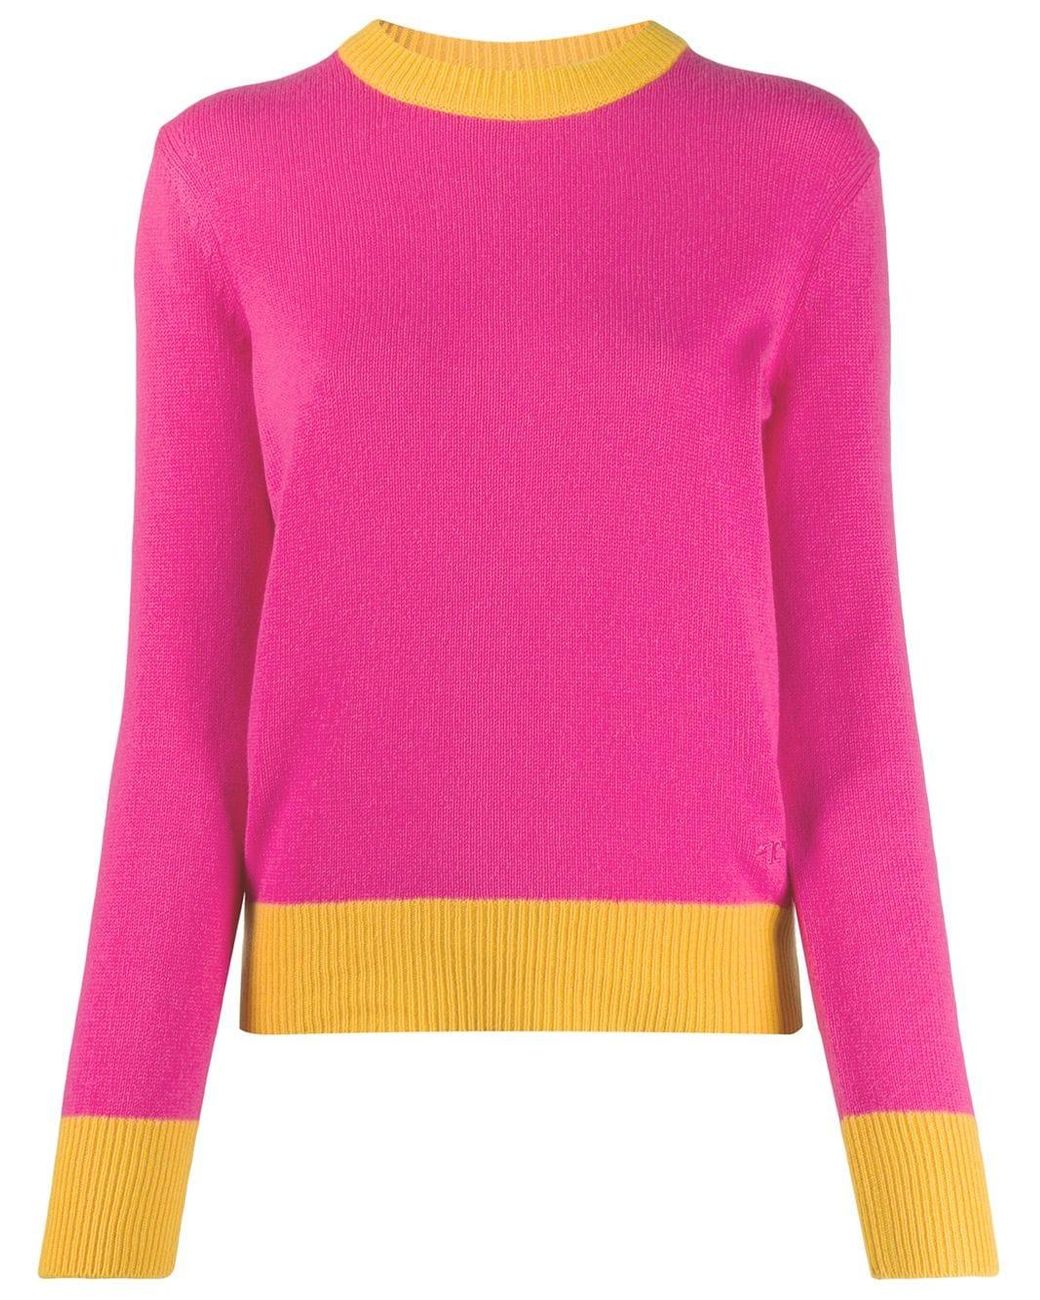 Tory Burch Cashmere Contrast-trim Sweater in Pink - Save 6% - Lyst